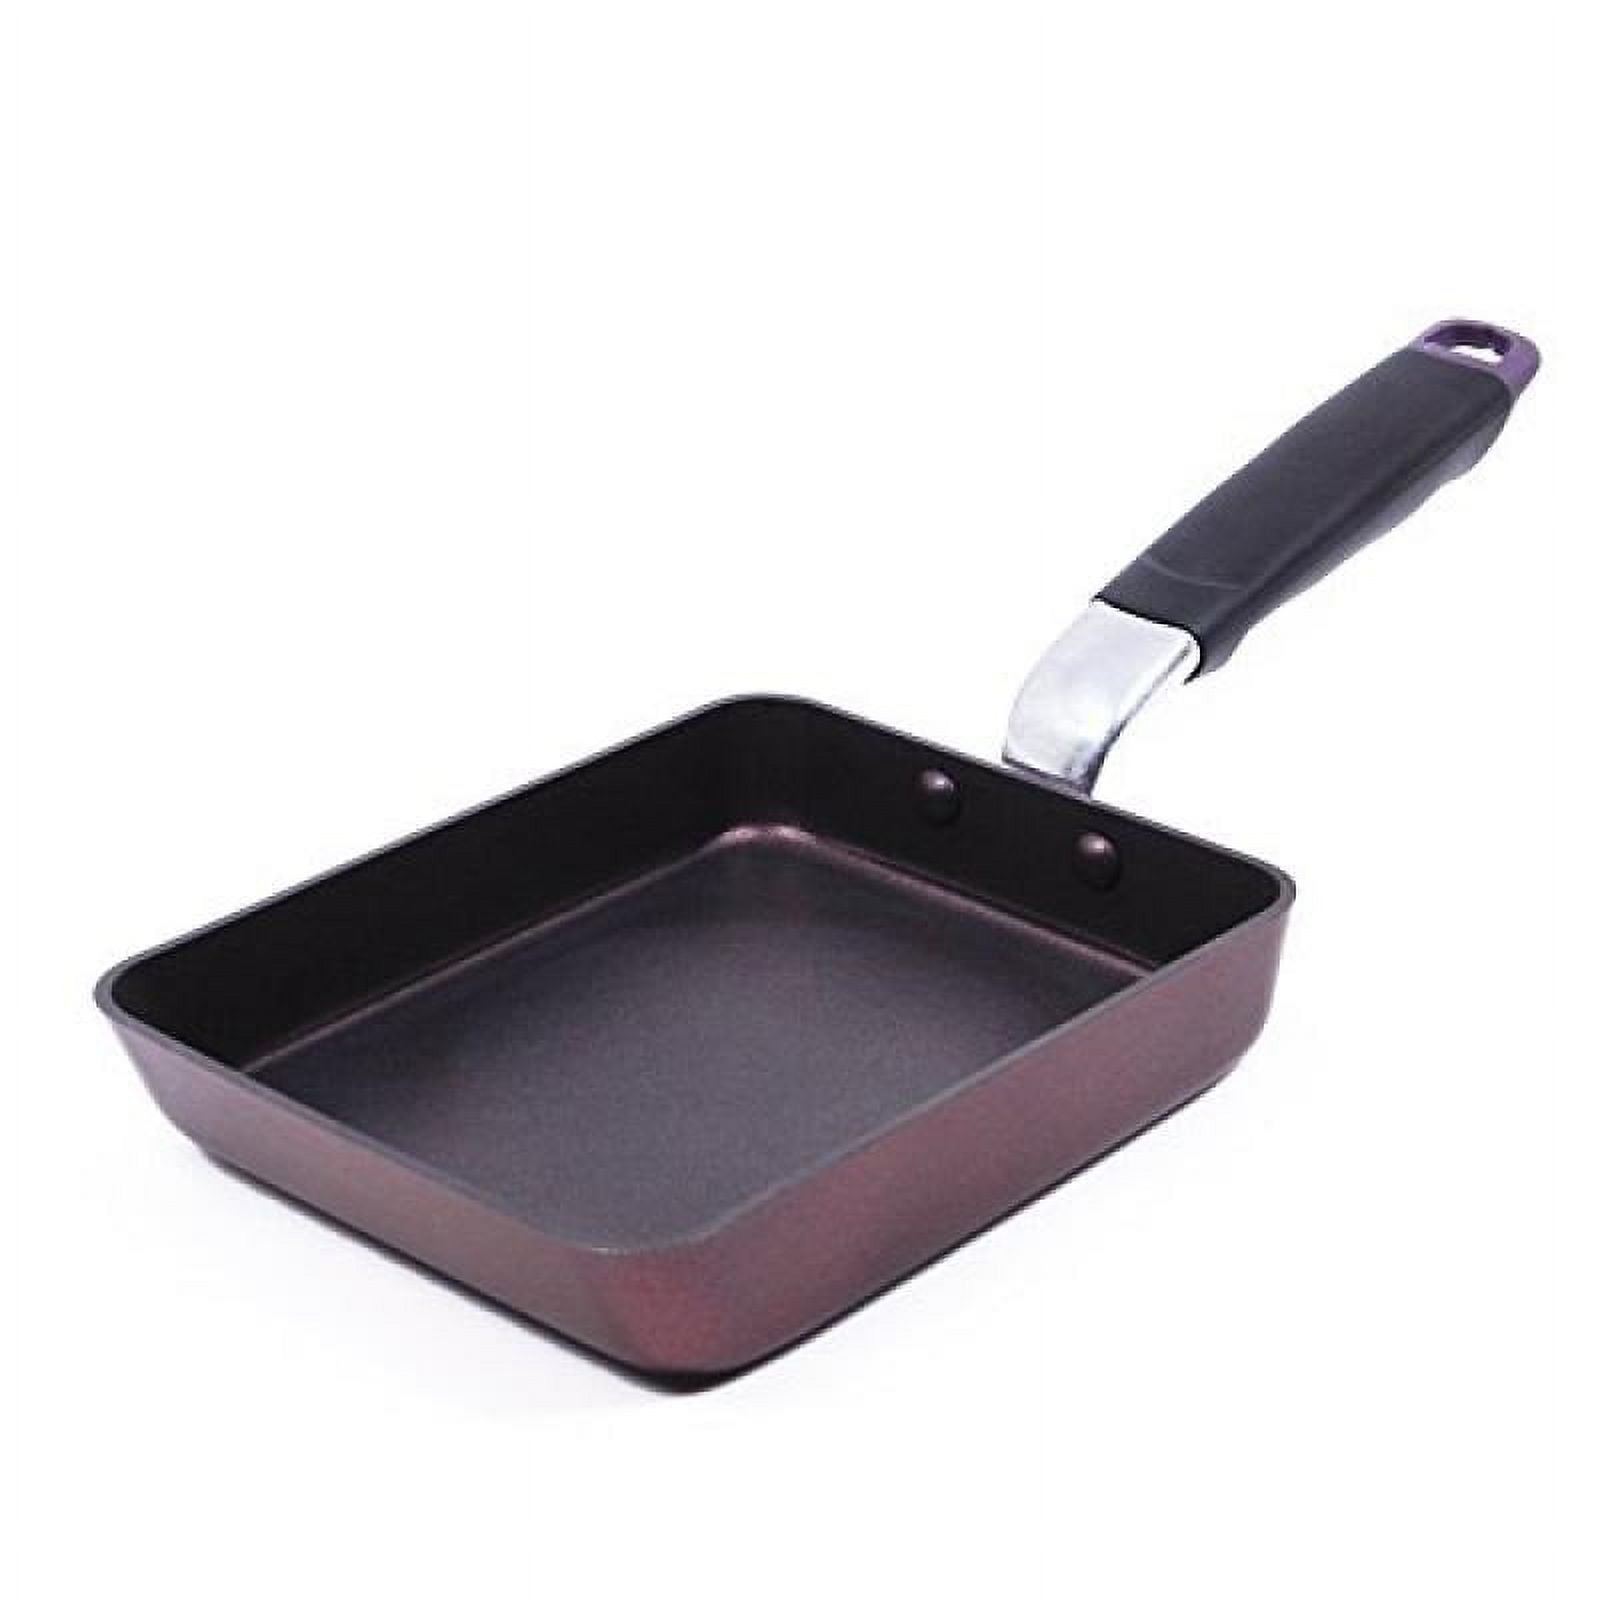 Techef - 5.5-Inch One Egg Frying Pan, Coated with New Teflon Select/Non-Stick Coating (PFOA Free), Size: 5.5 inch